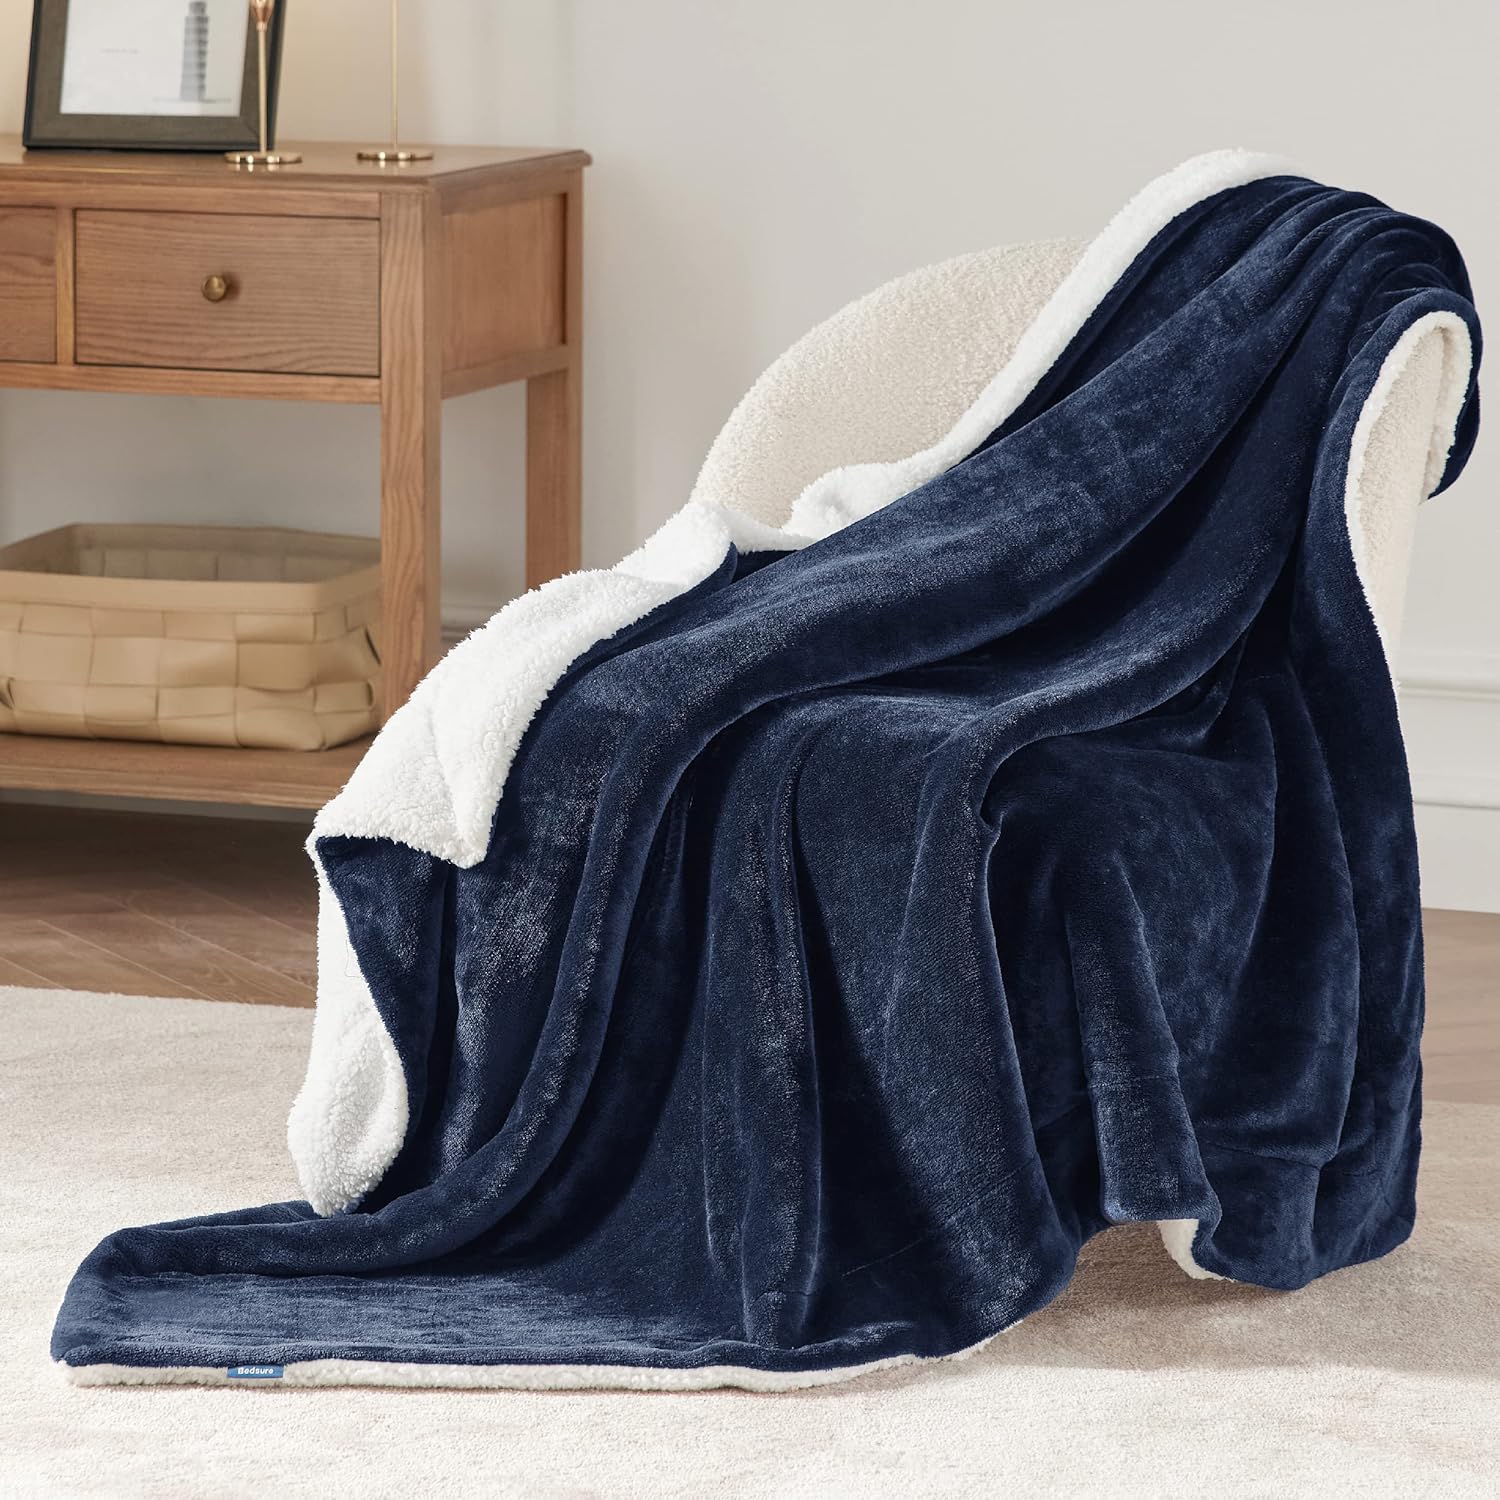 Bedsure Sherpa Fleece Throw Blanket for Couch - Thick and Warm